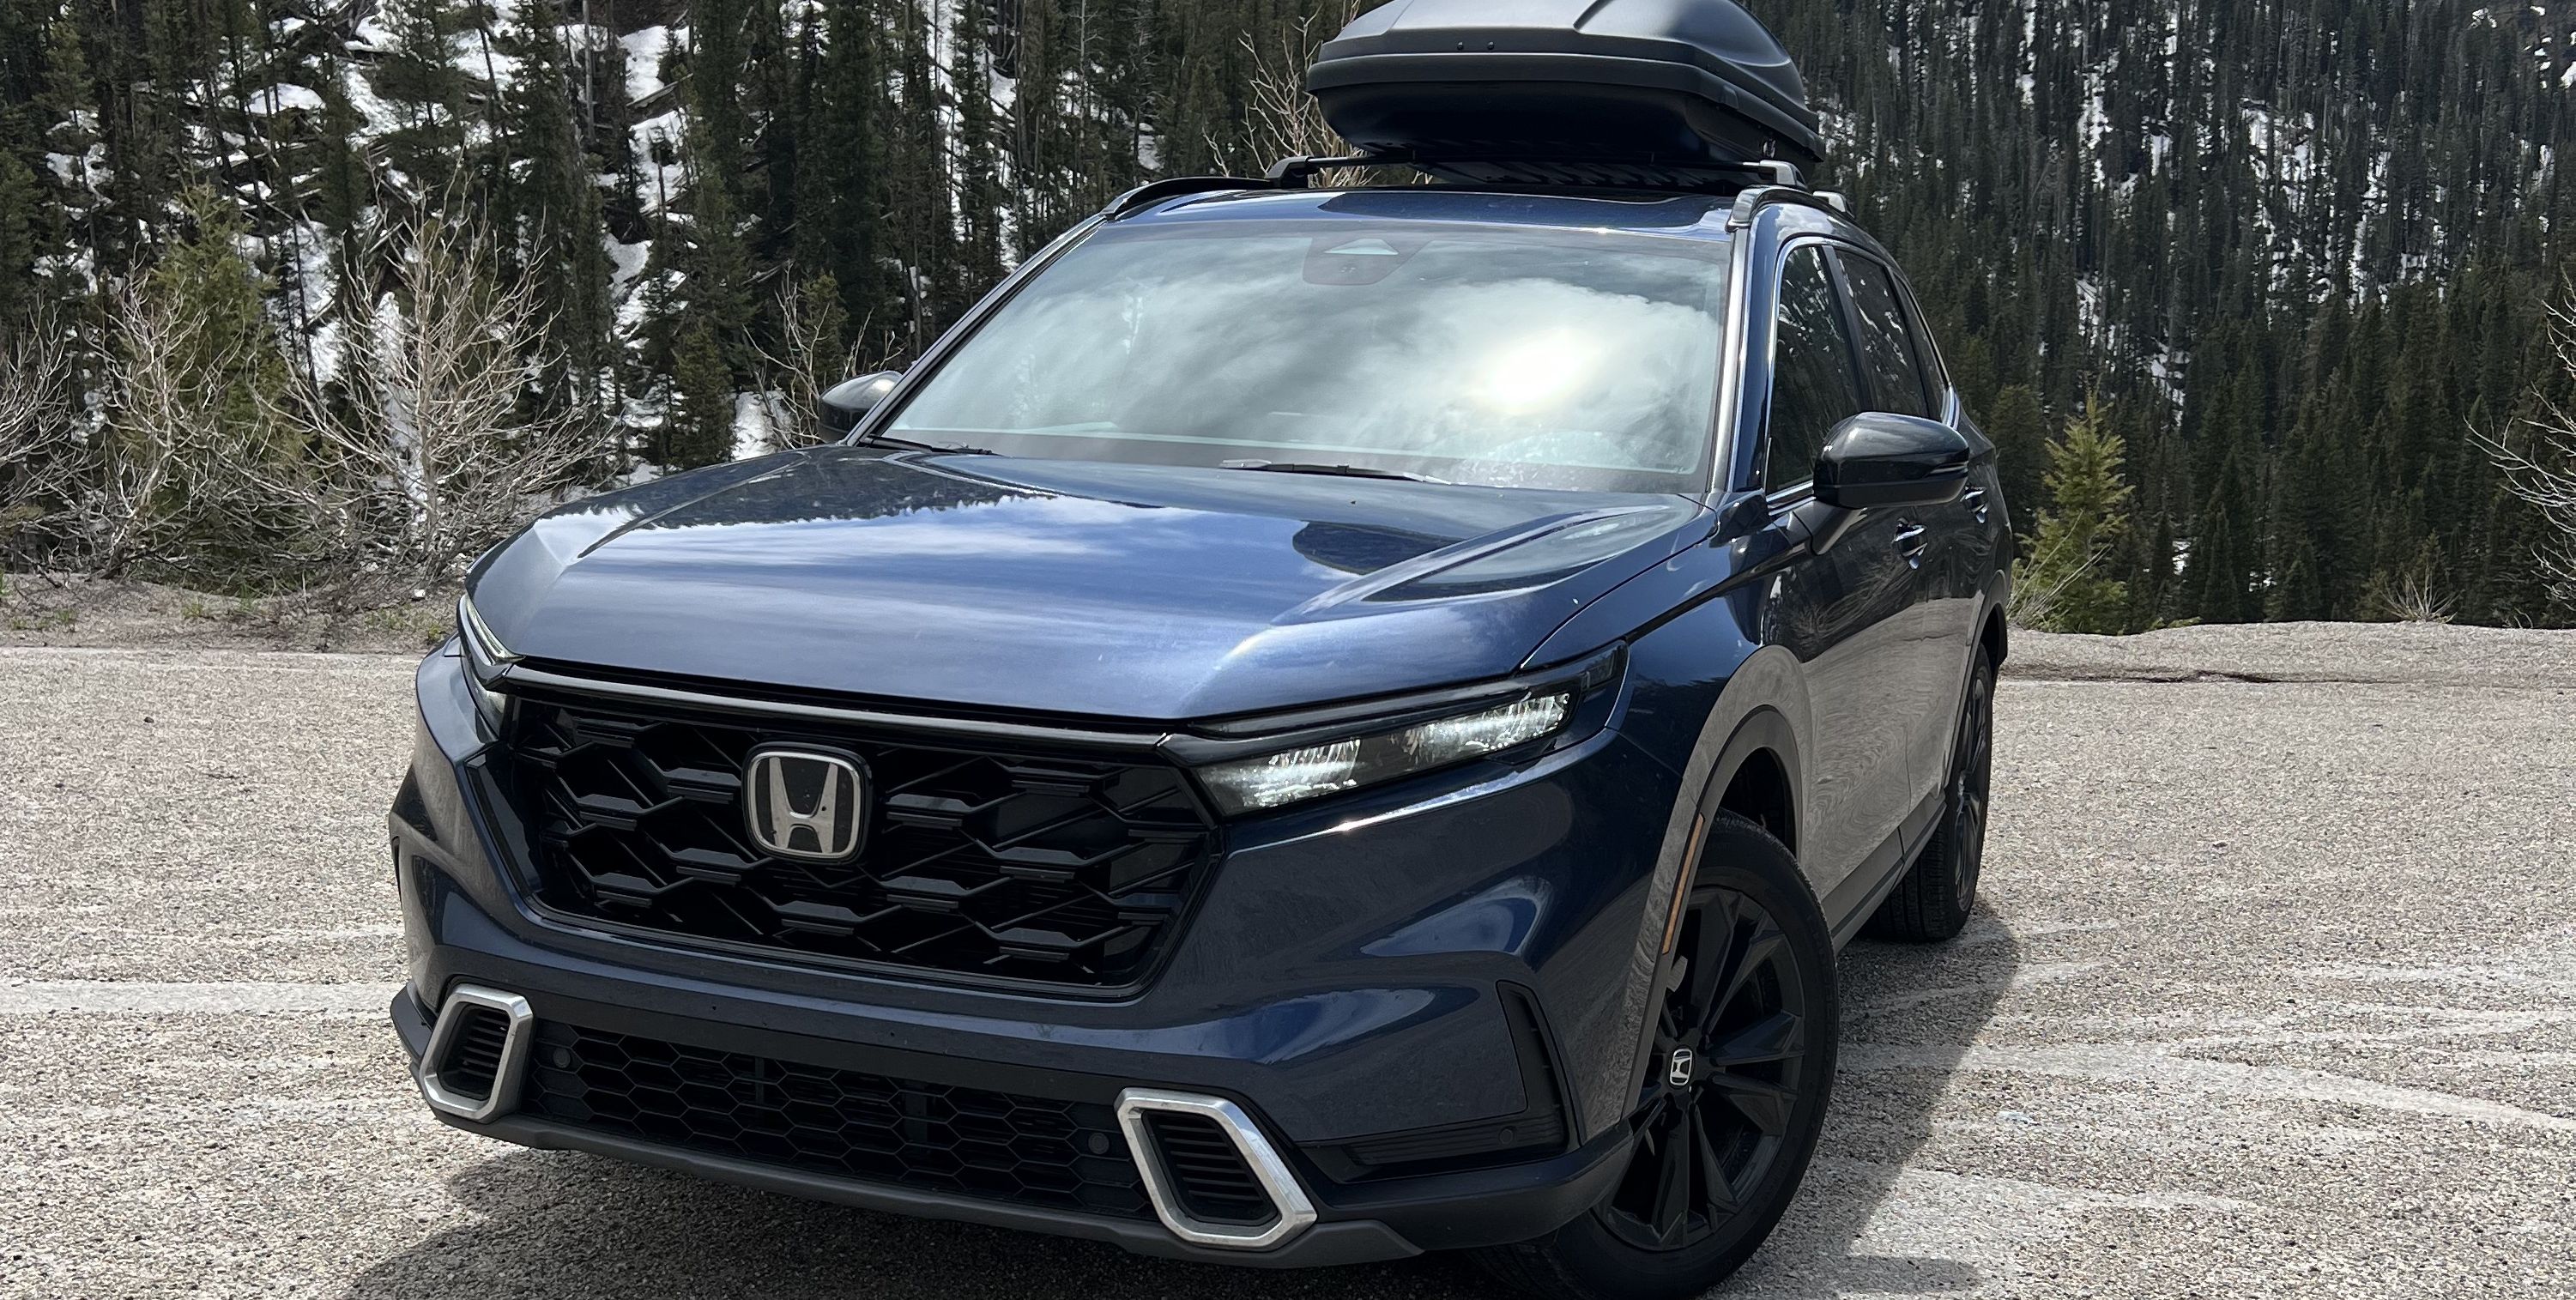 You Don't Need a Bigger SUV, You Need a Roof Box